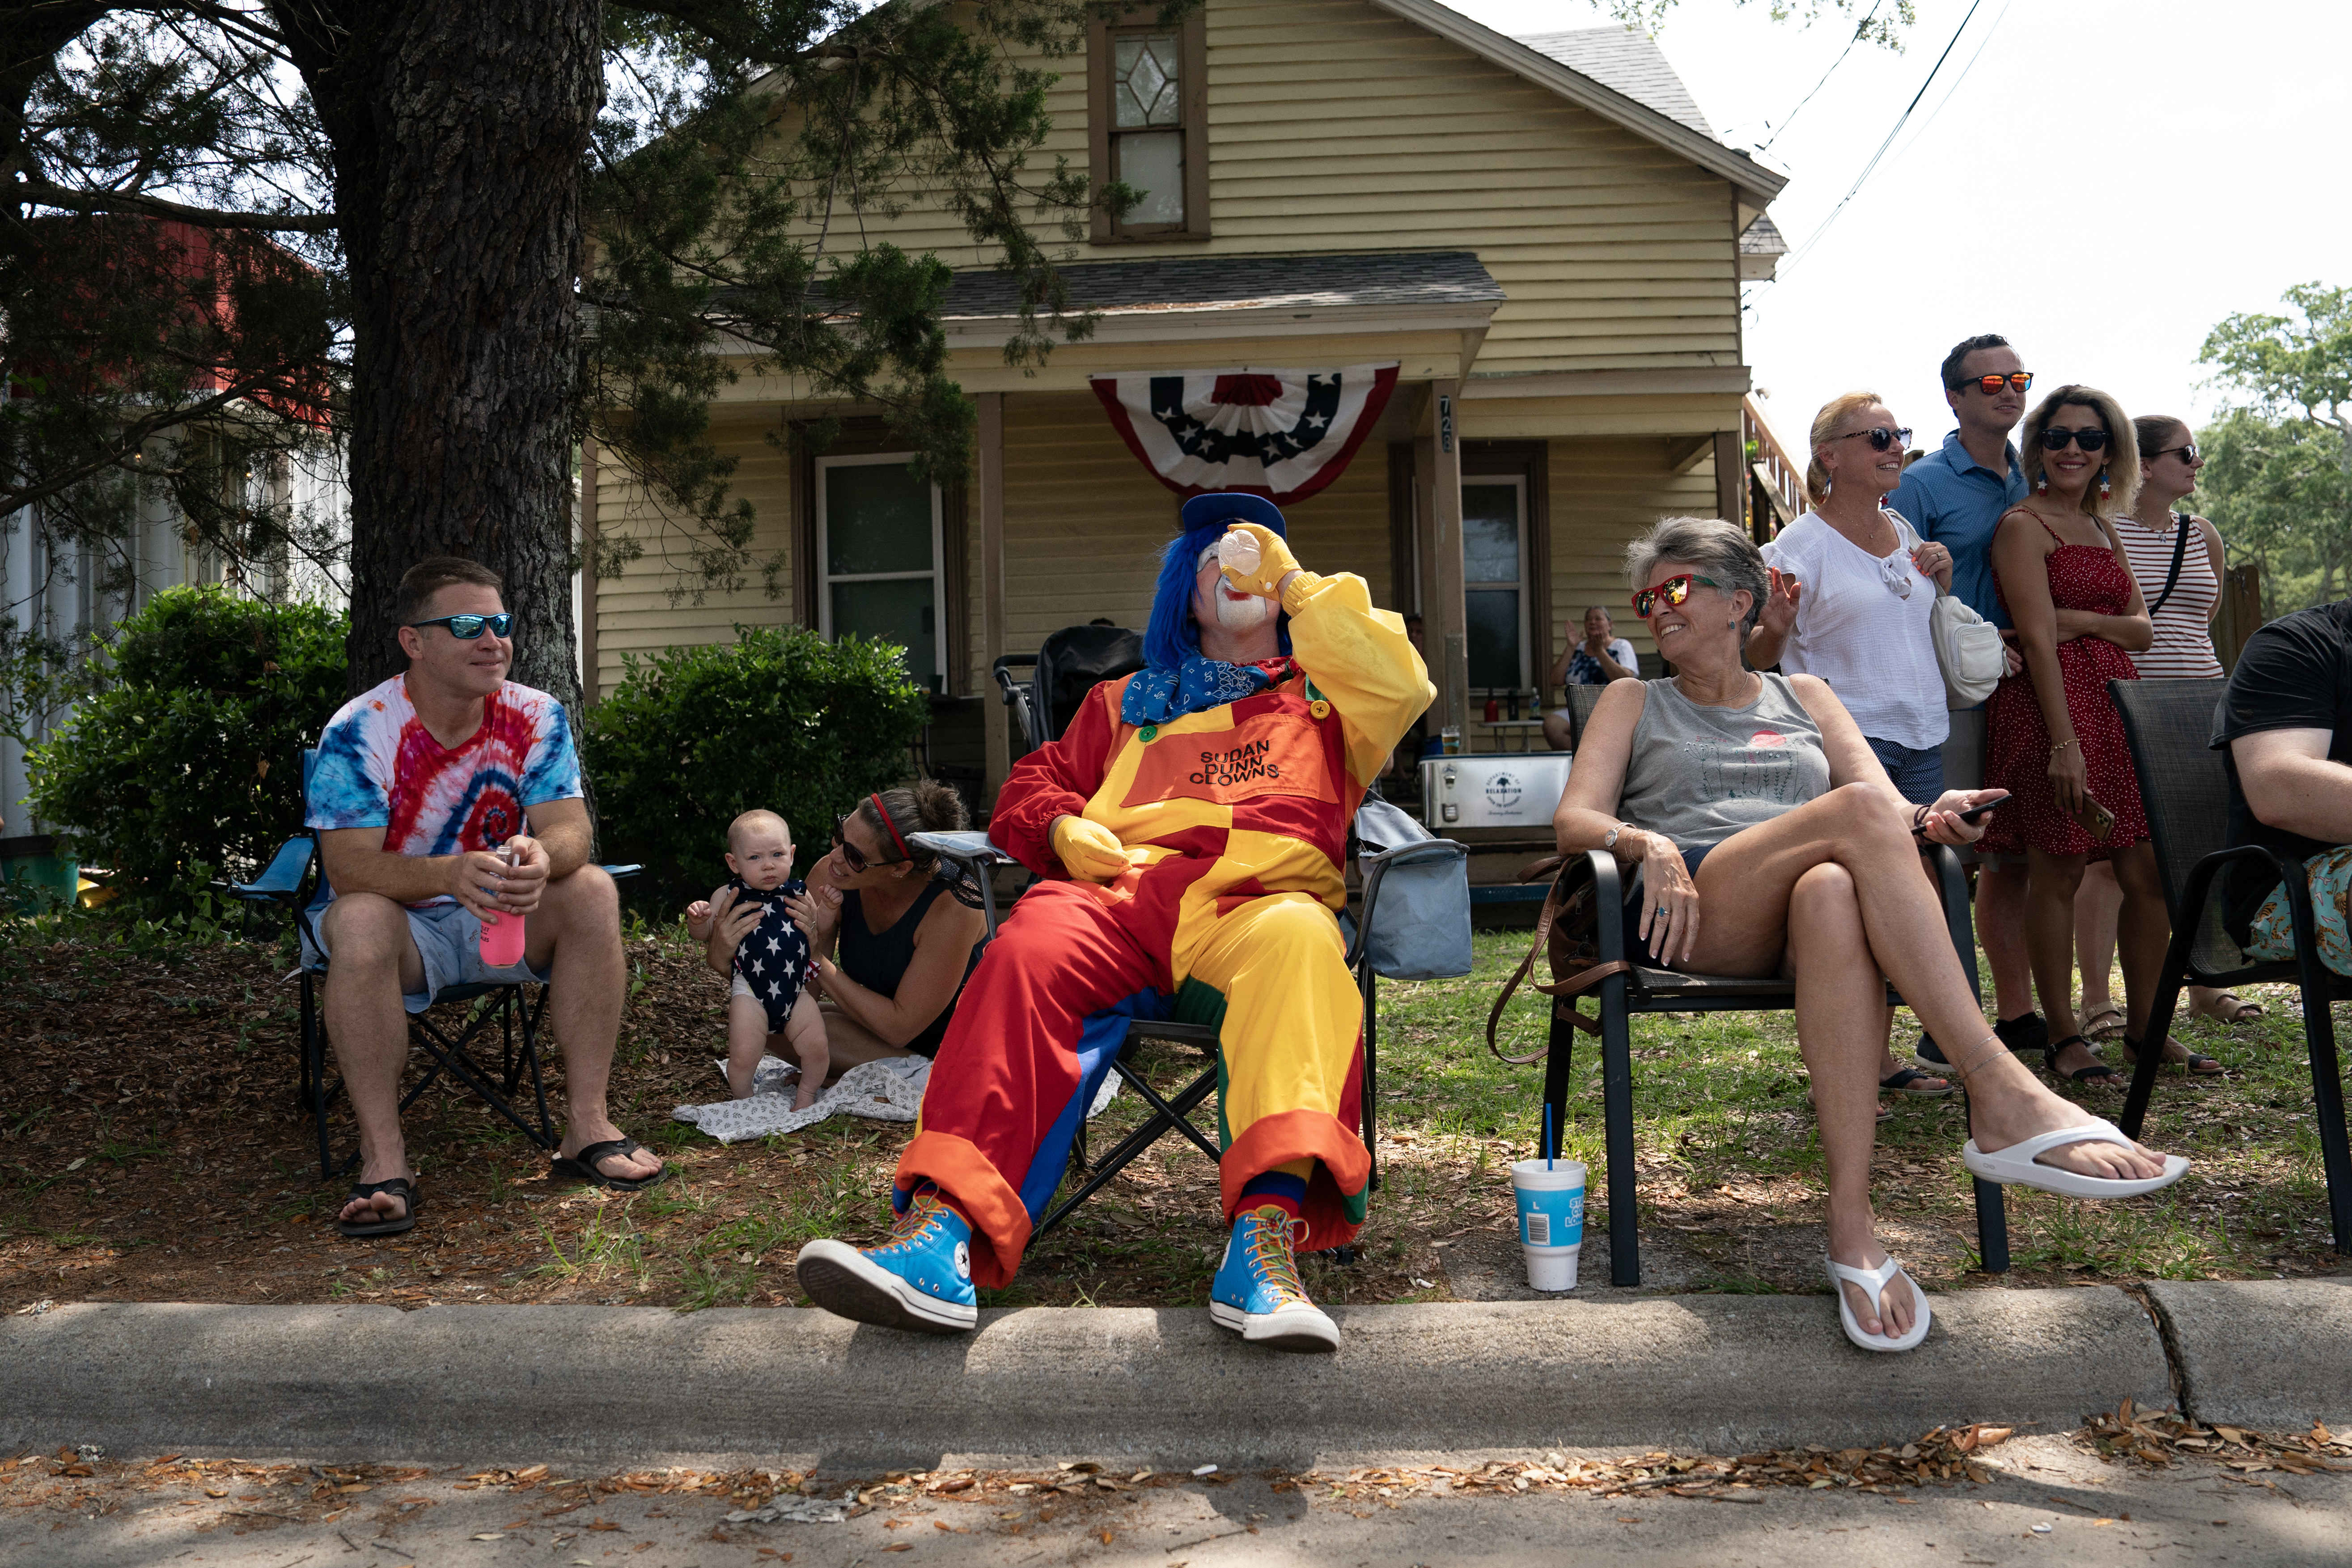 People, including someone in a clown costume, sitting outside of a house